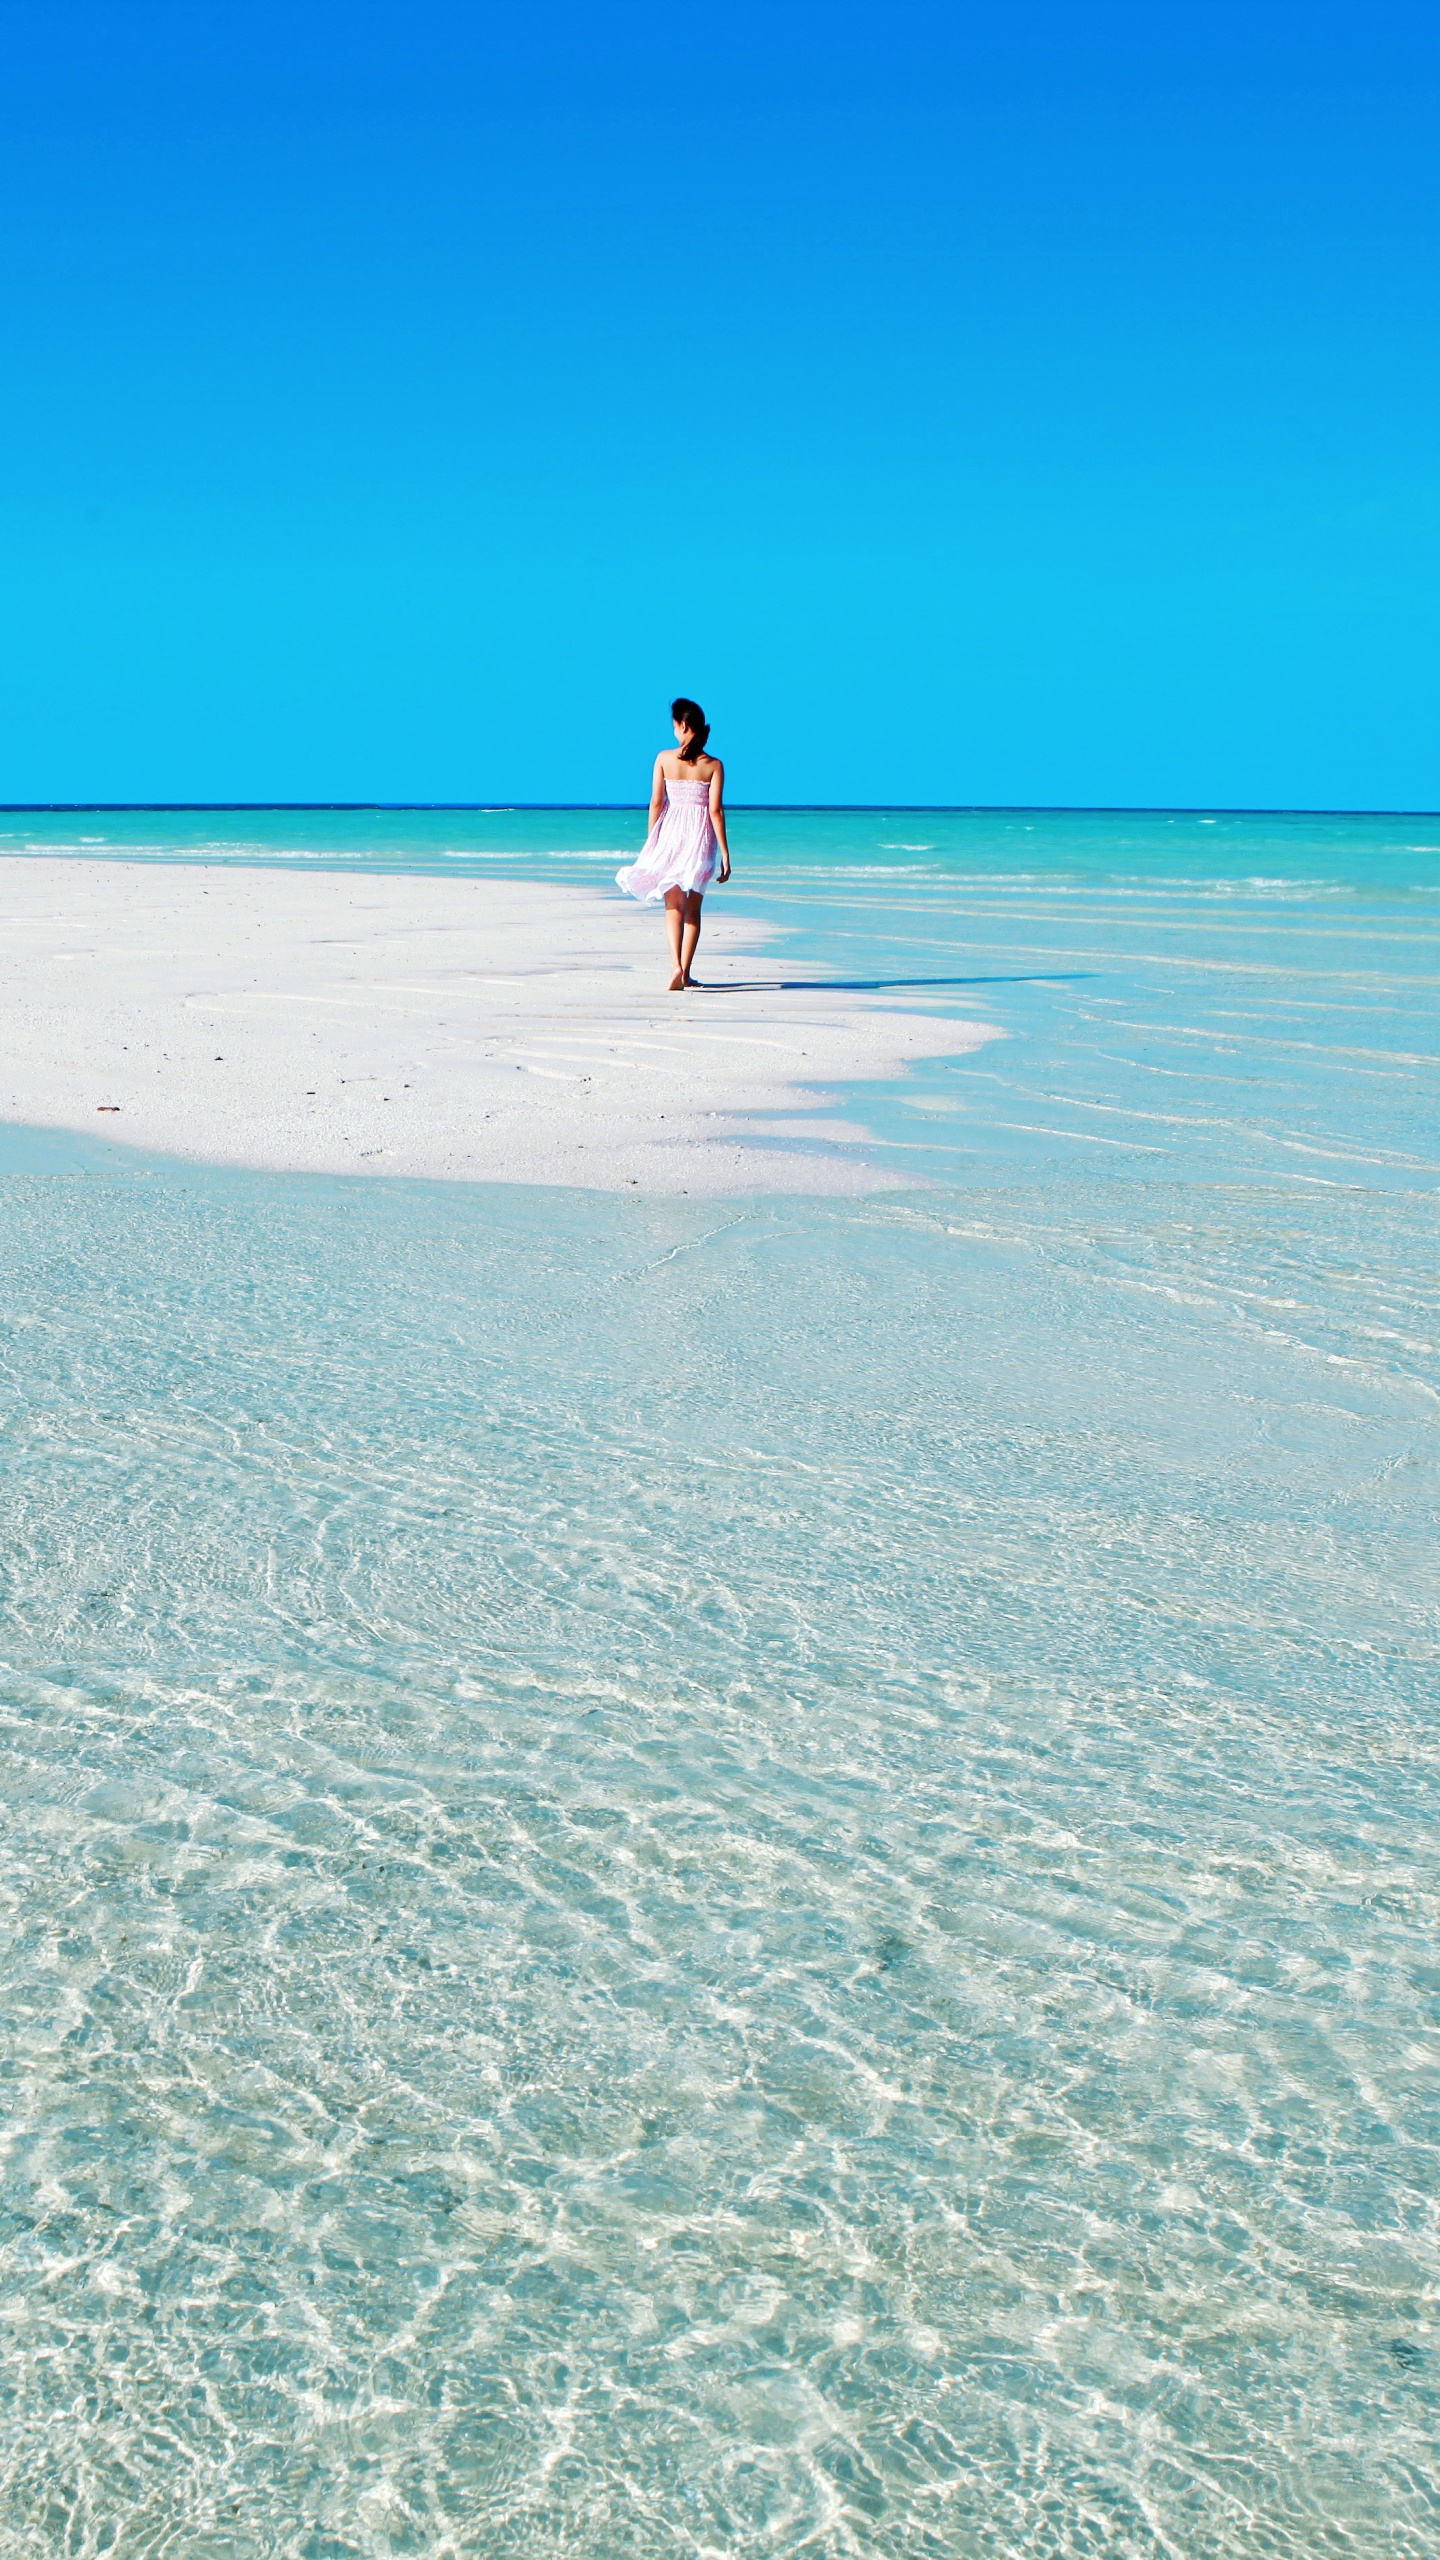 Woman in White Shirt Walking on Beach During Daytime. Wallpaper in 1440x2560 Resolution